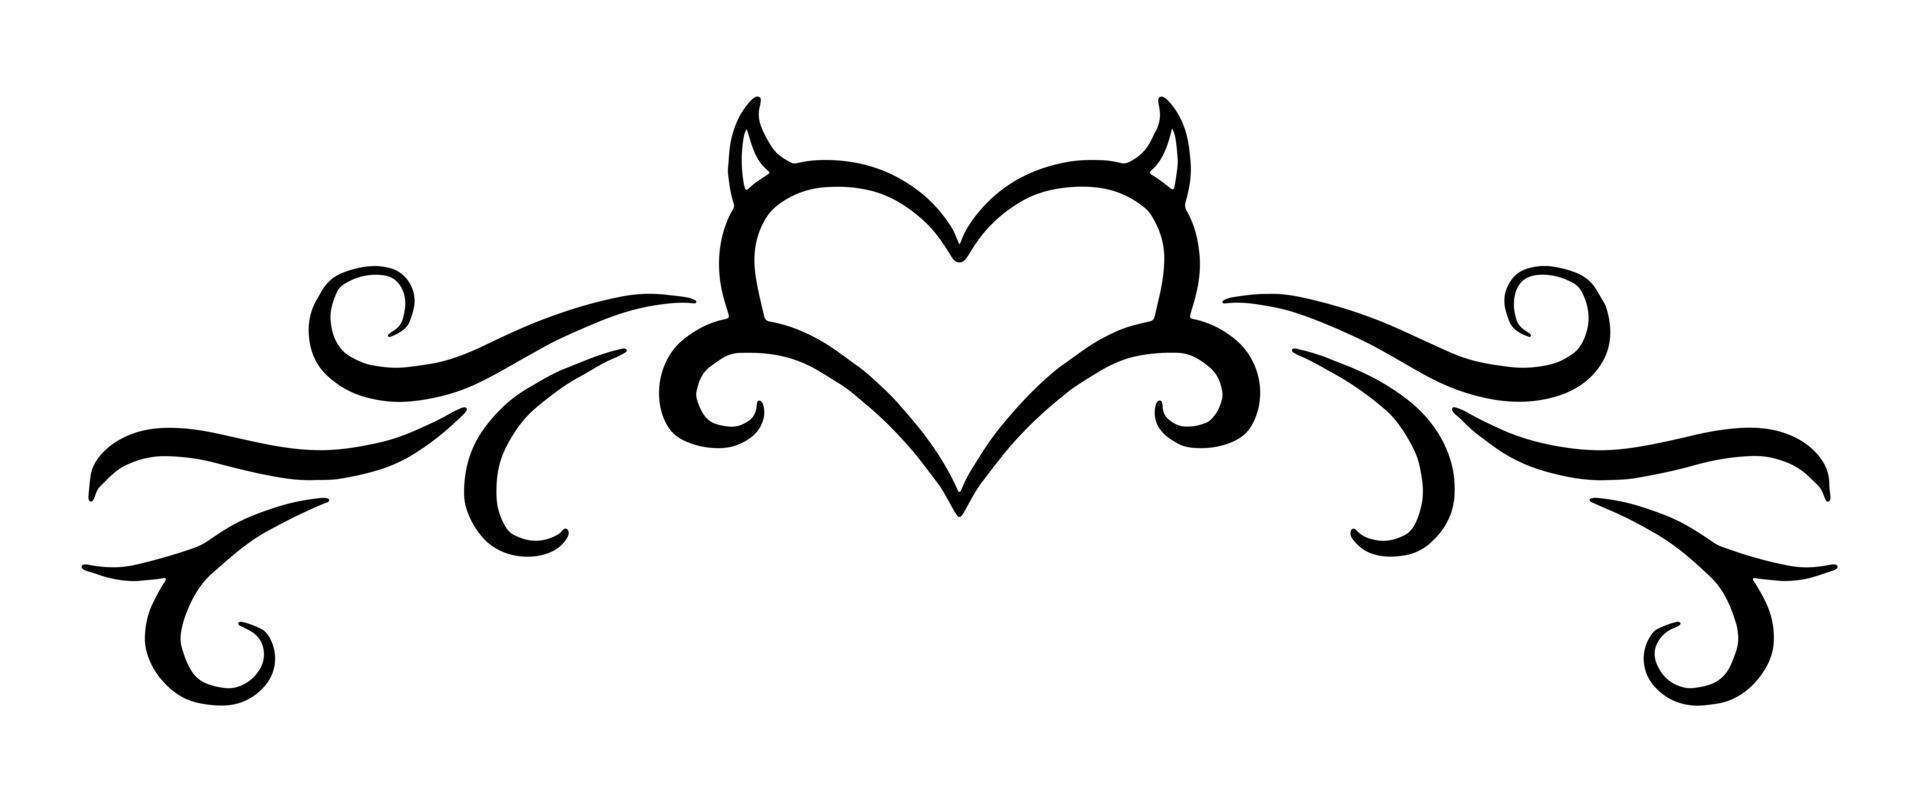 Celtic Heart pattern. Oriental tattoo for the lower back. Girl's transferable temporary tattoo vector